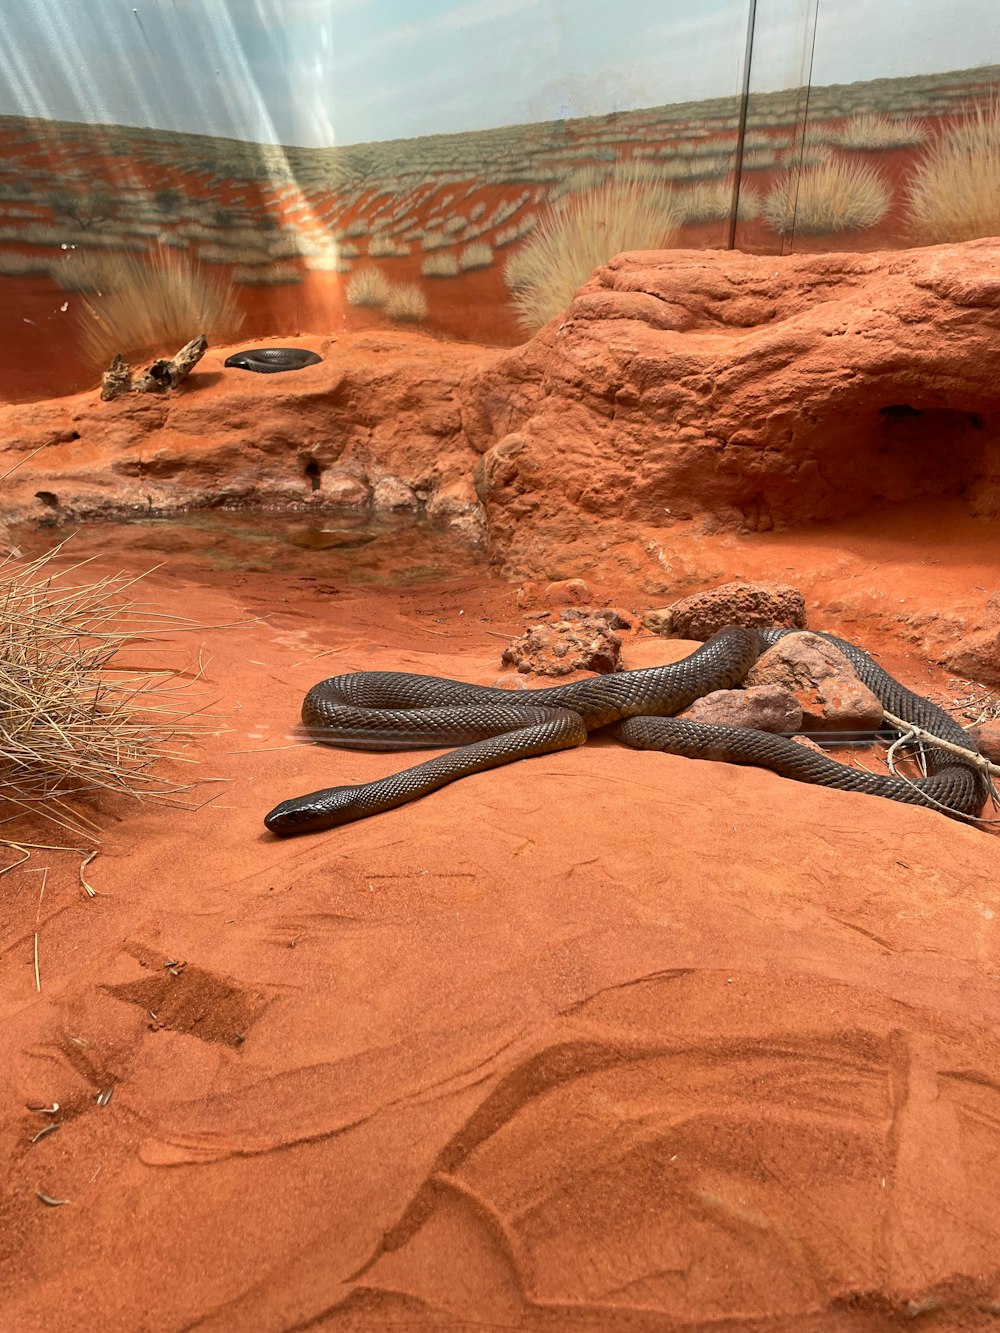 a snake laying on a rock in the desert